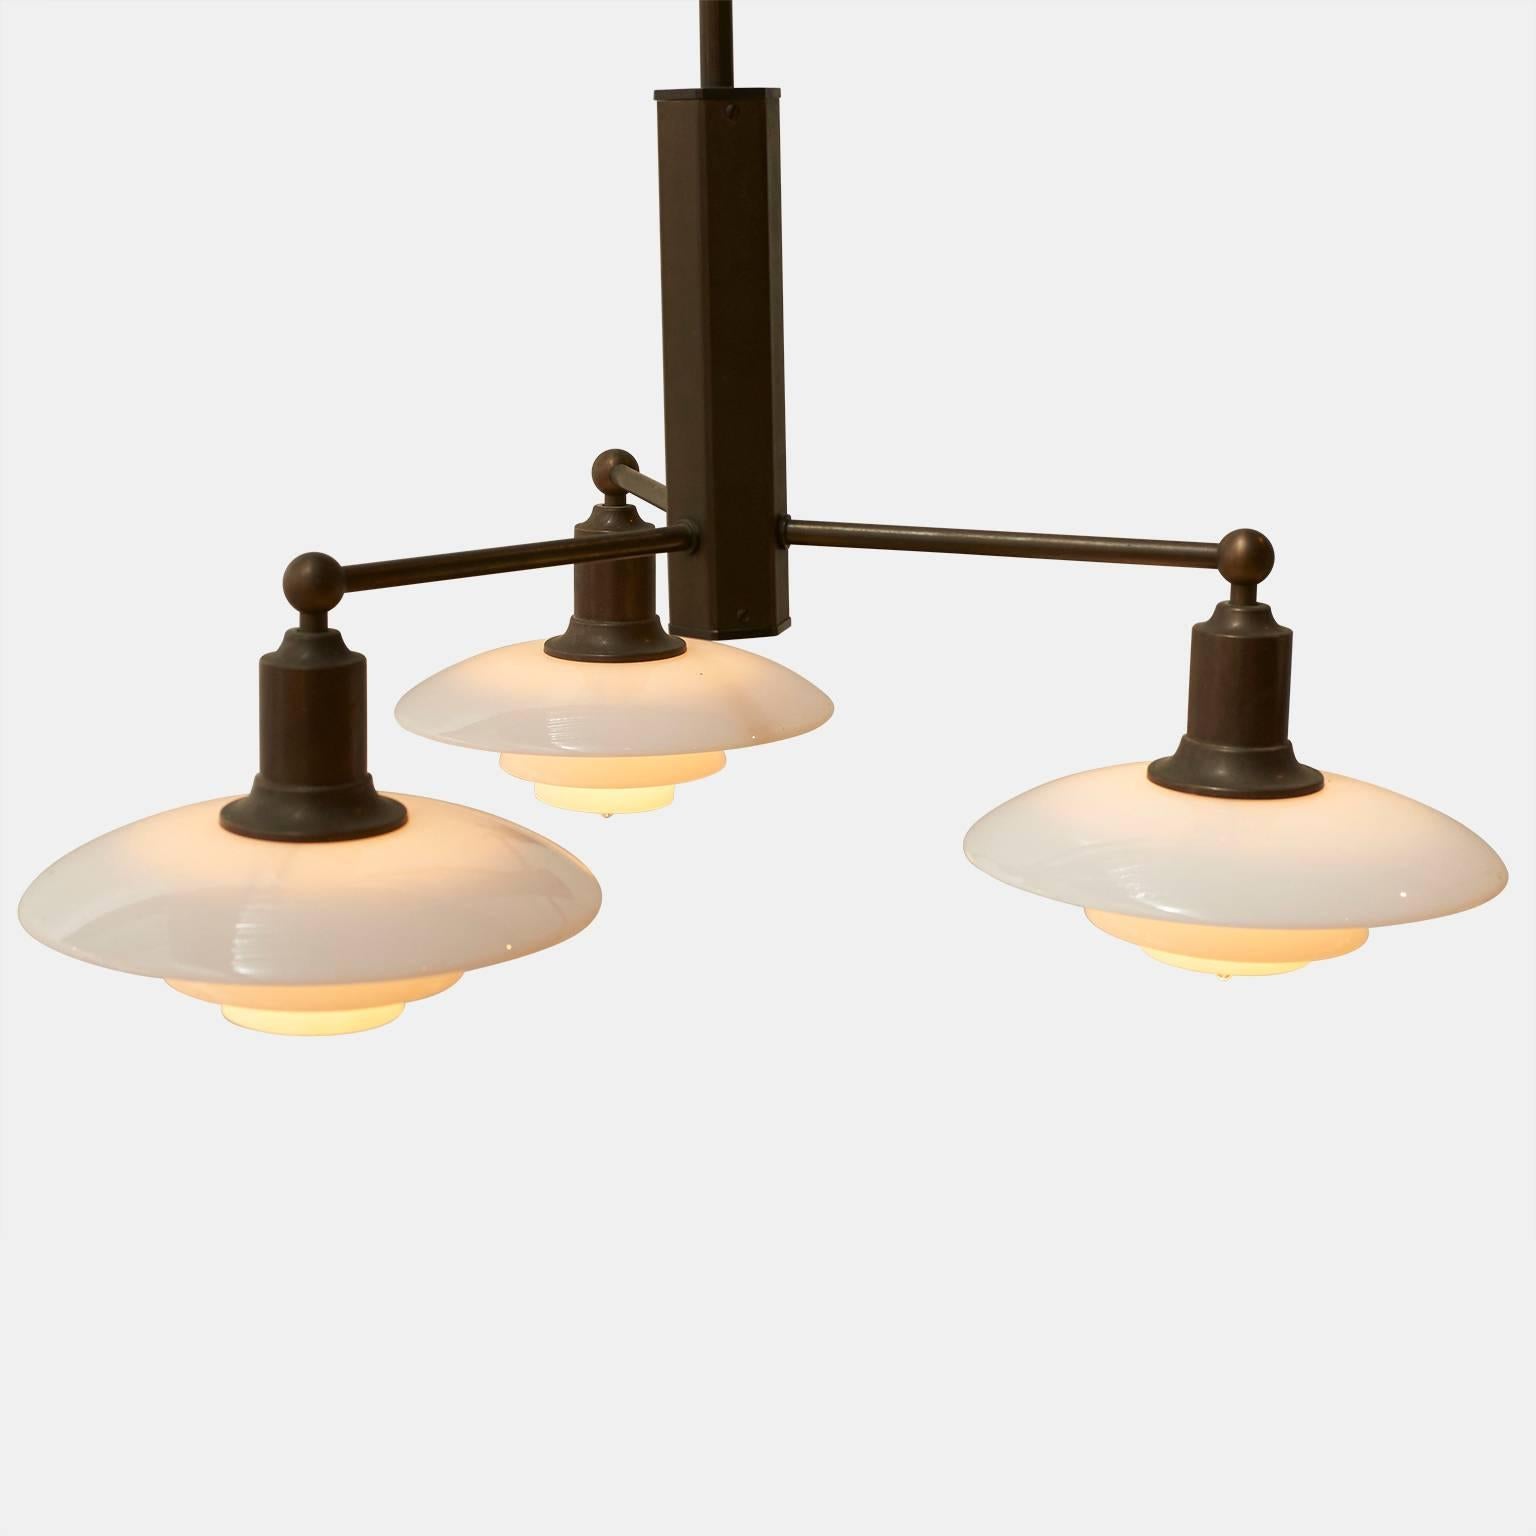 Danish Poul Henningsen Pair of Limited Edition Three-Arm Chandeliers